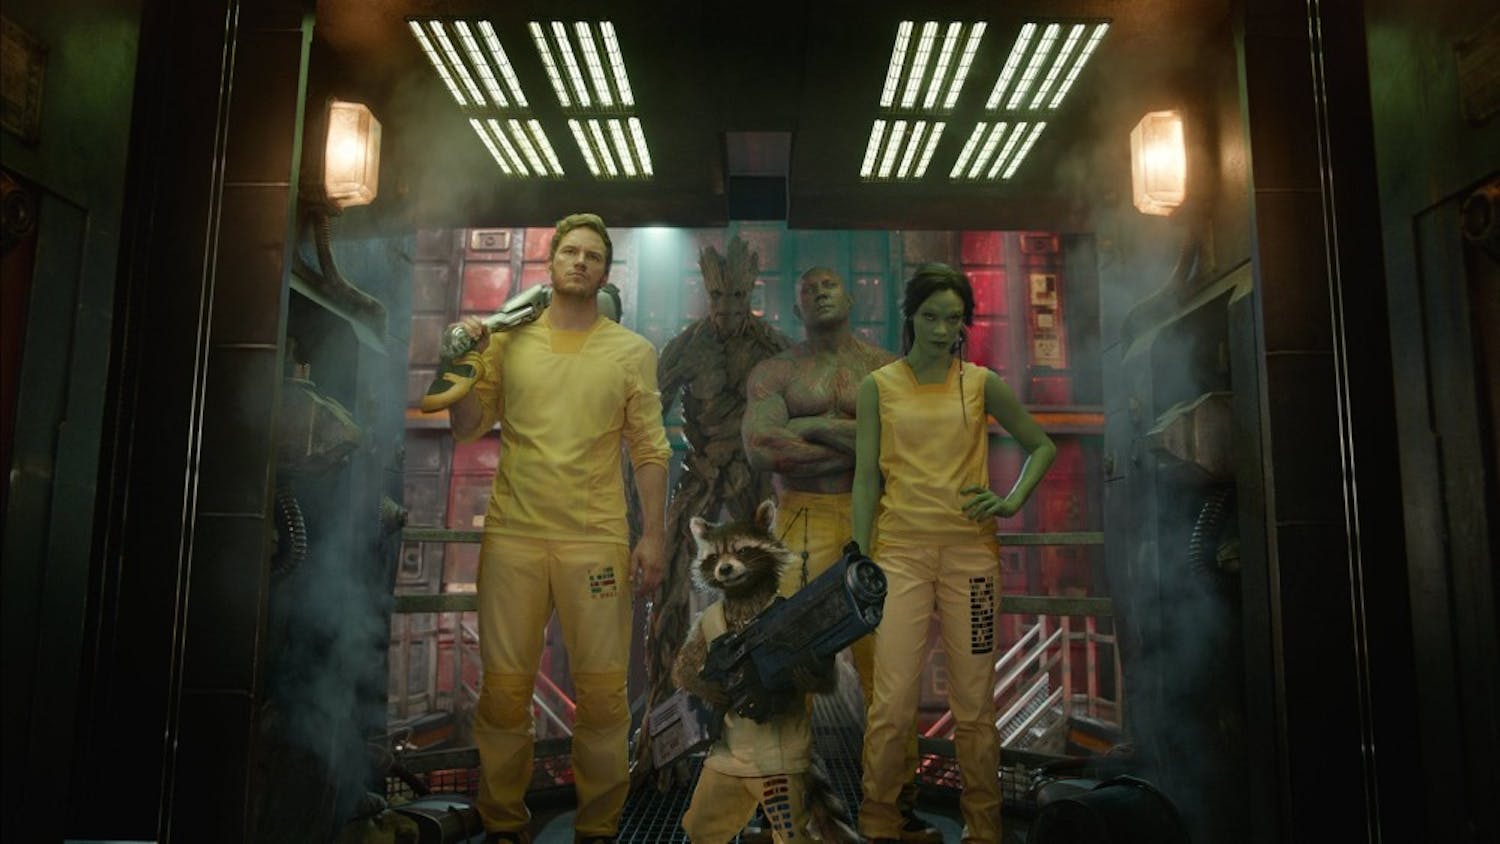 Marvel's Guardians Of The Galaxy are, from left, Chris Pratt as Star-Lord/Peter Quill, Vin Diesal as Groot, Bradley Cooper as the voice of Rocket Raccoon, Dave Bautista as Drax the Destroyer, and Zoe Saldana as Gamora. (Marvel/MCT)